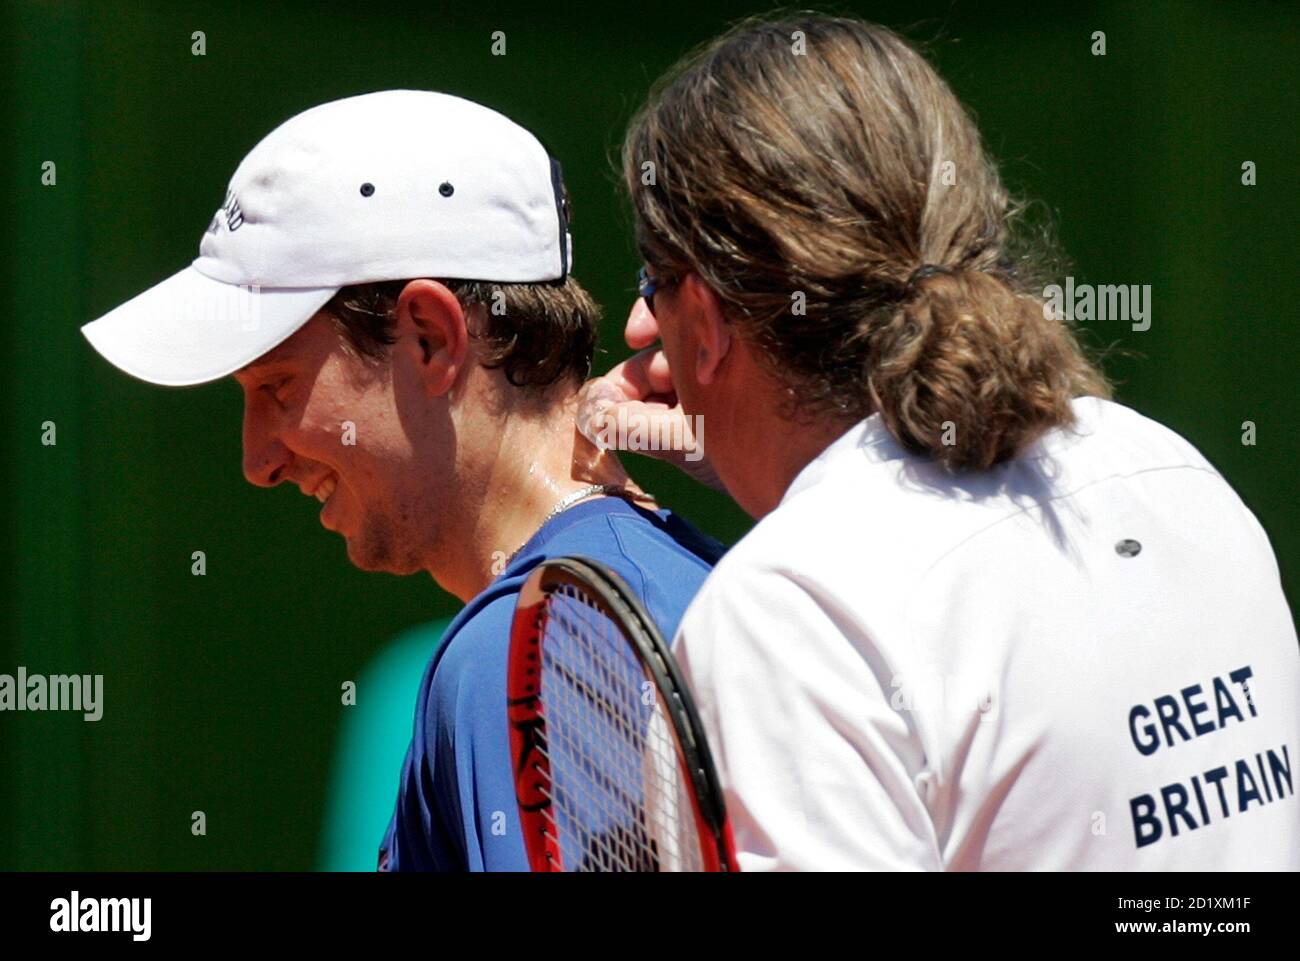 Britain's coach Peter Lundgren (R) places an ice cube on tennis player Alex  Bogdanovic's neck during a training session ahead of their first round  Davis Cup match against Argentina in Buenos Aires